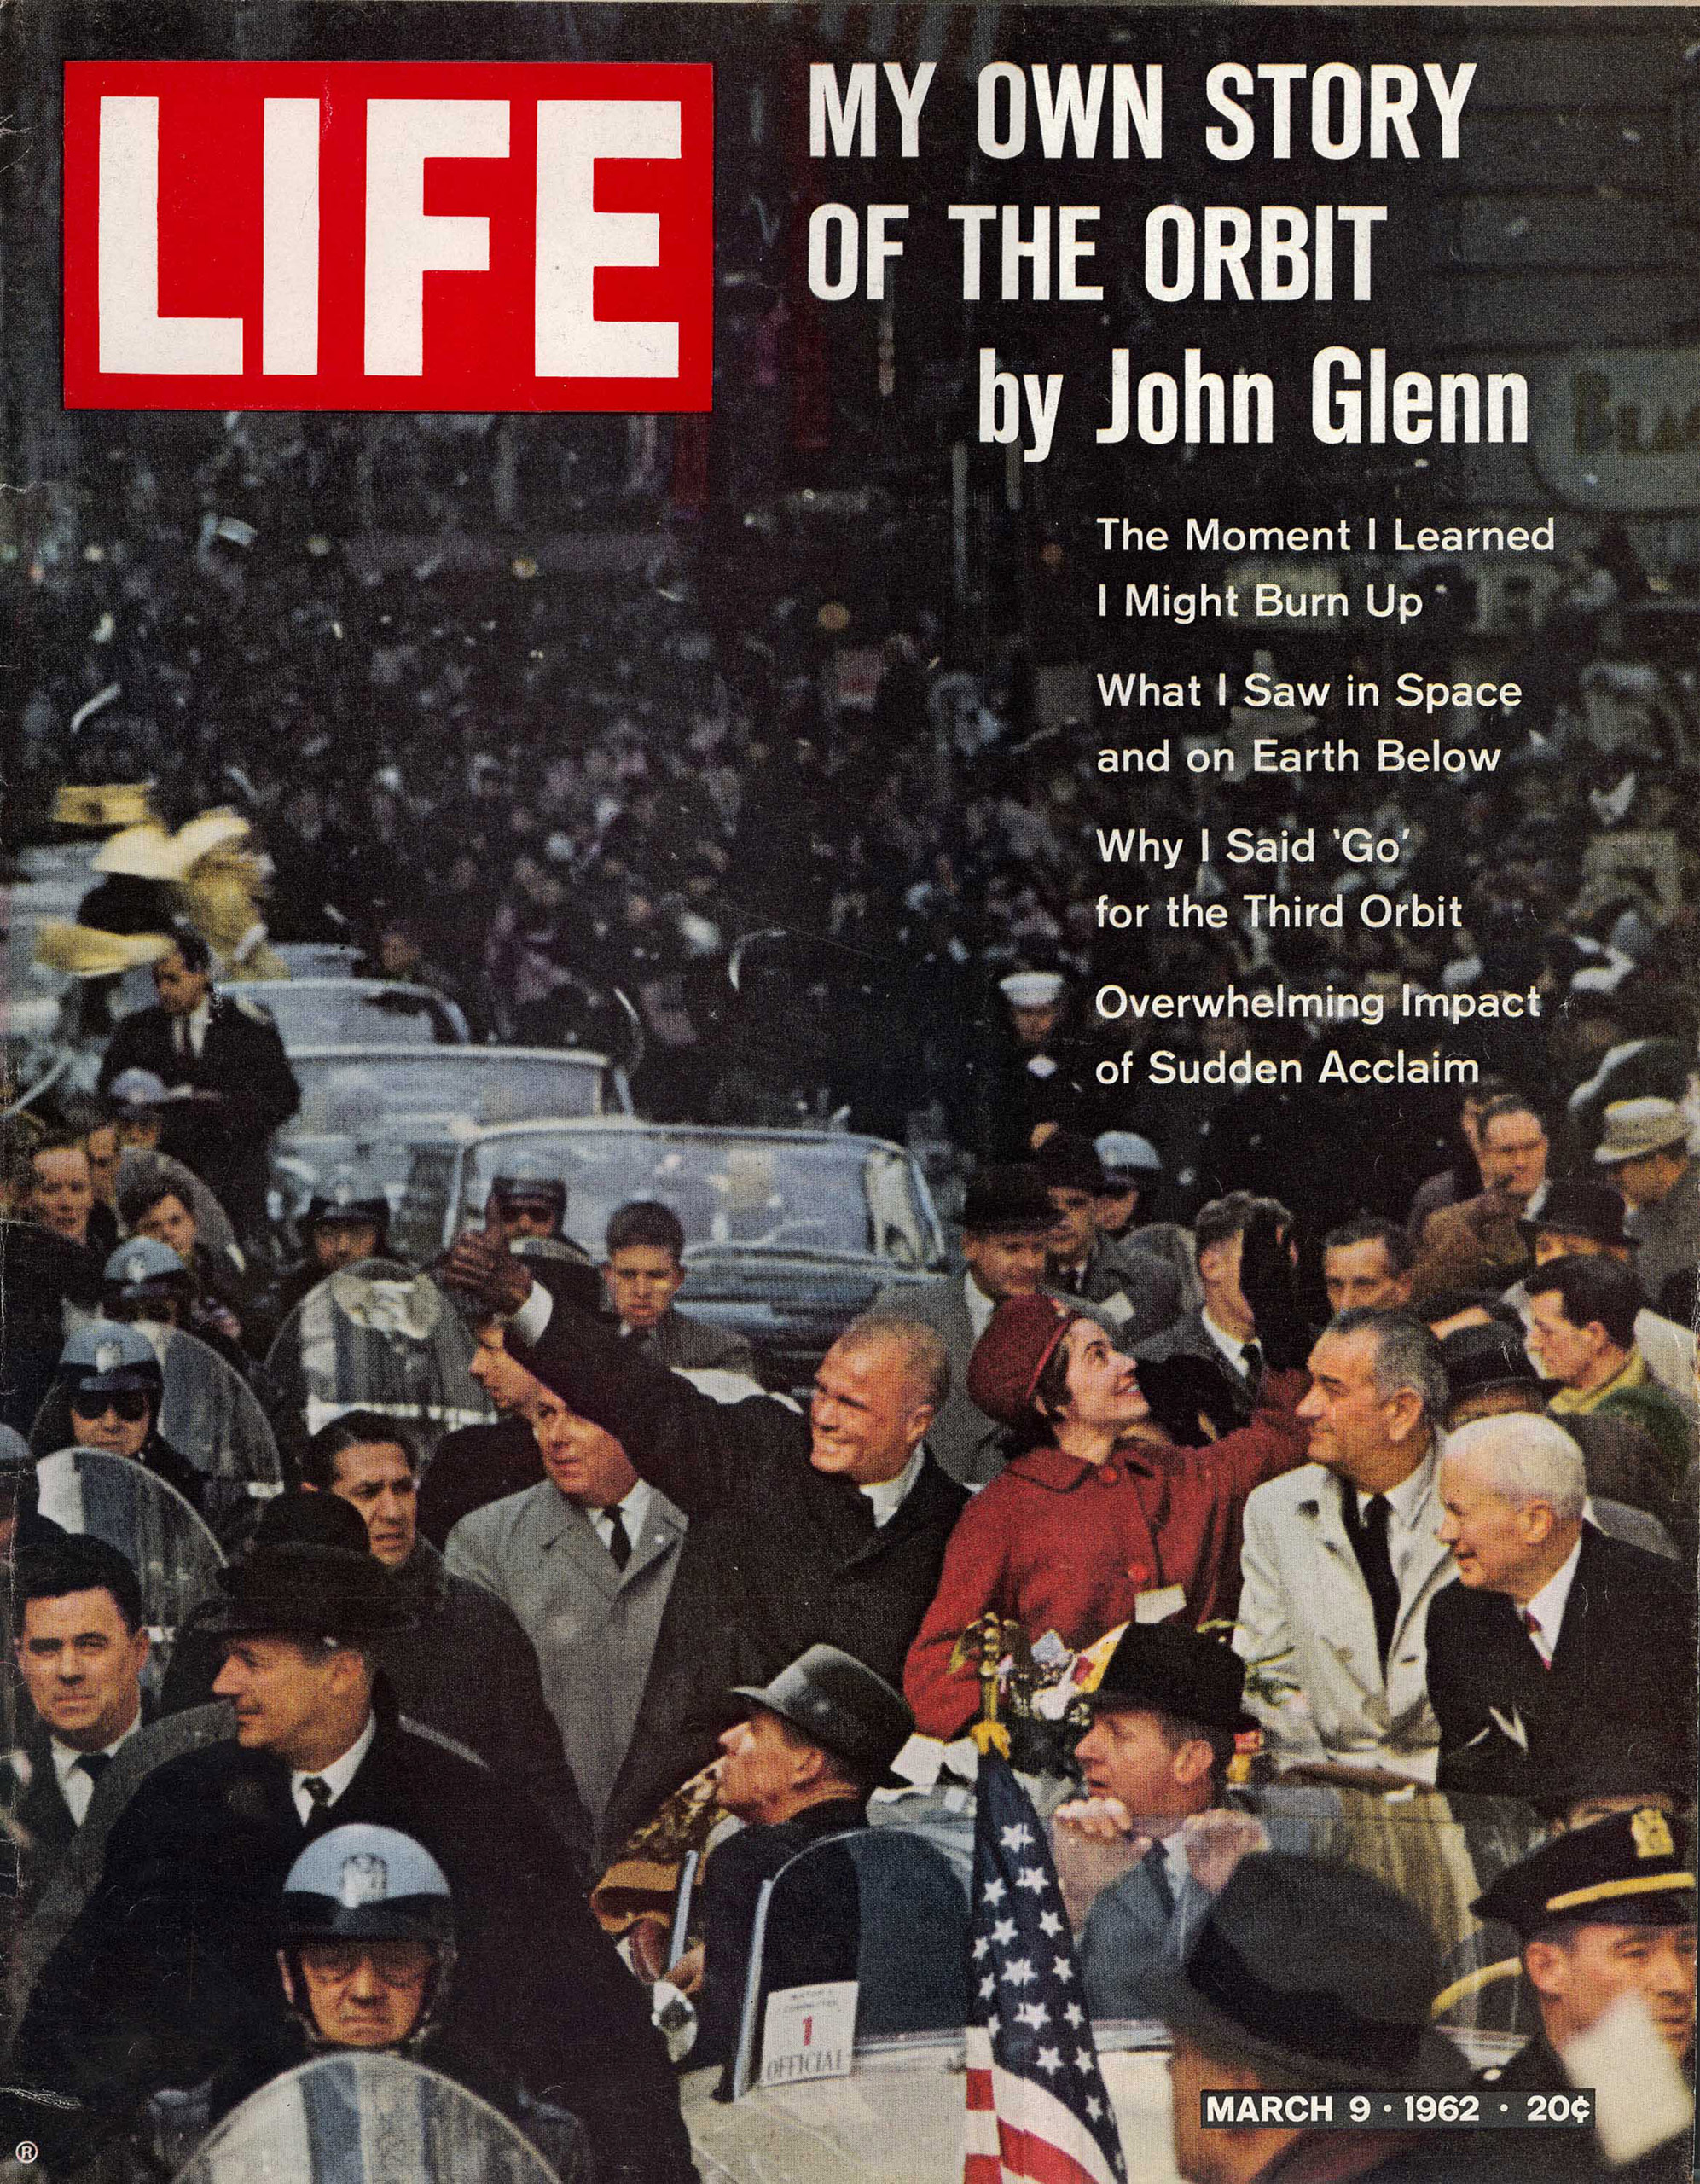 March 9, 1962 cover of LIFE magazine — "My Own Story of the Orbit" by John Glenn.